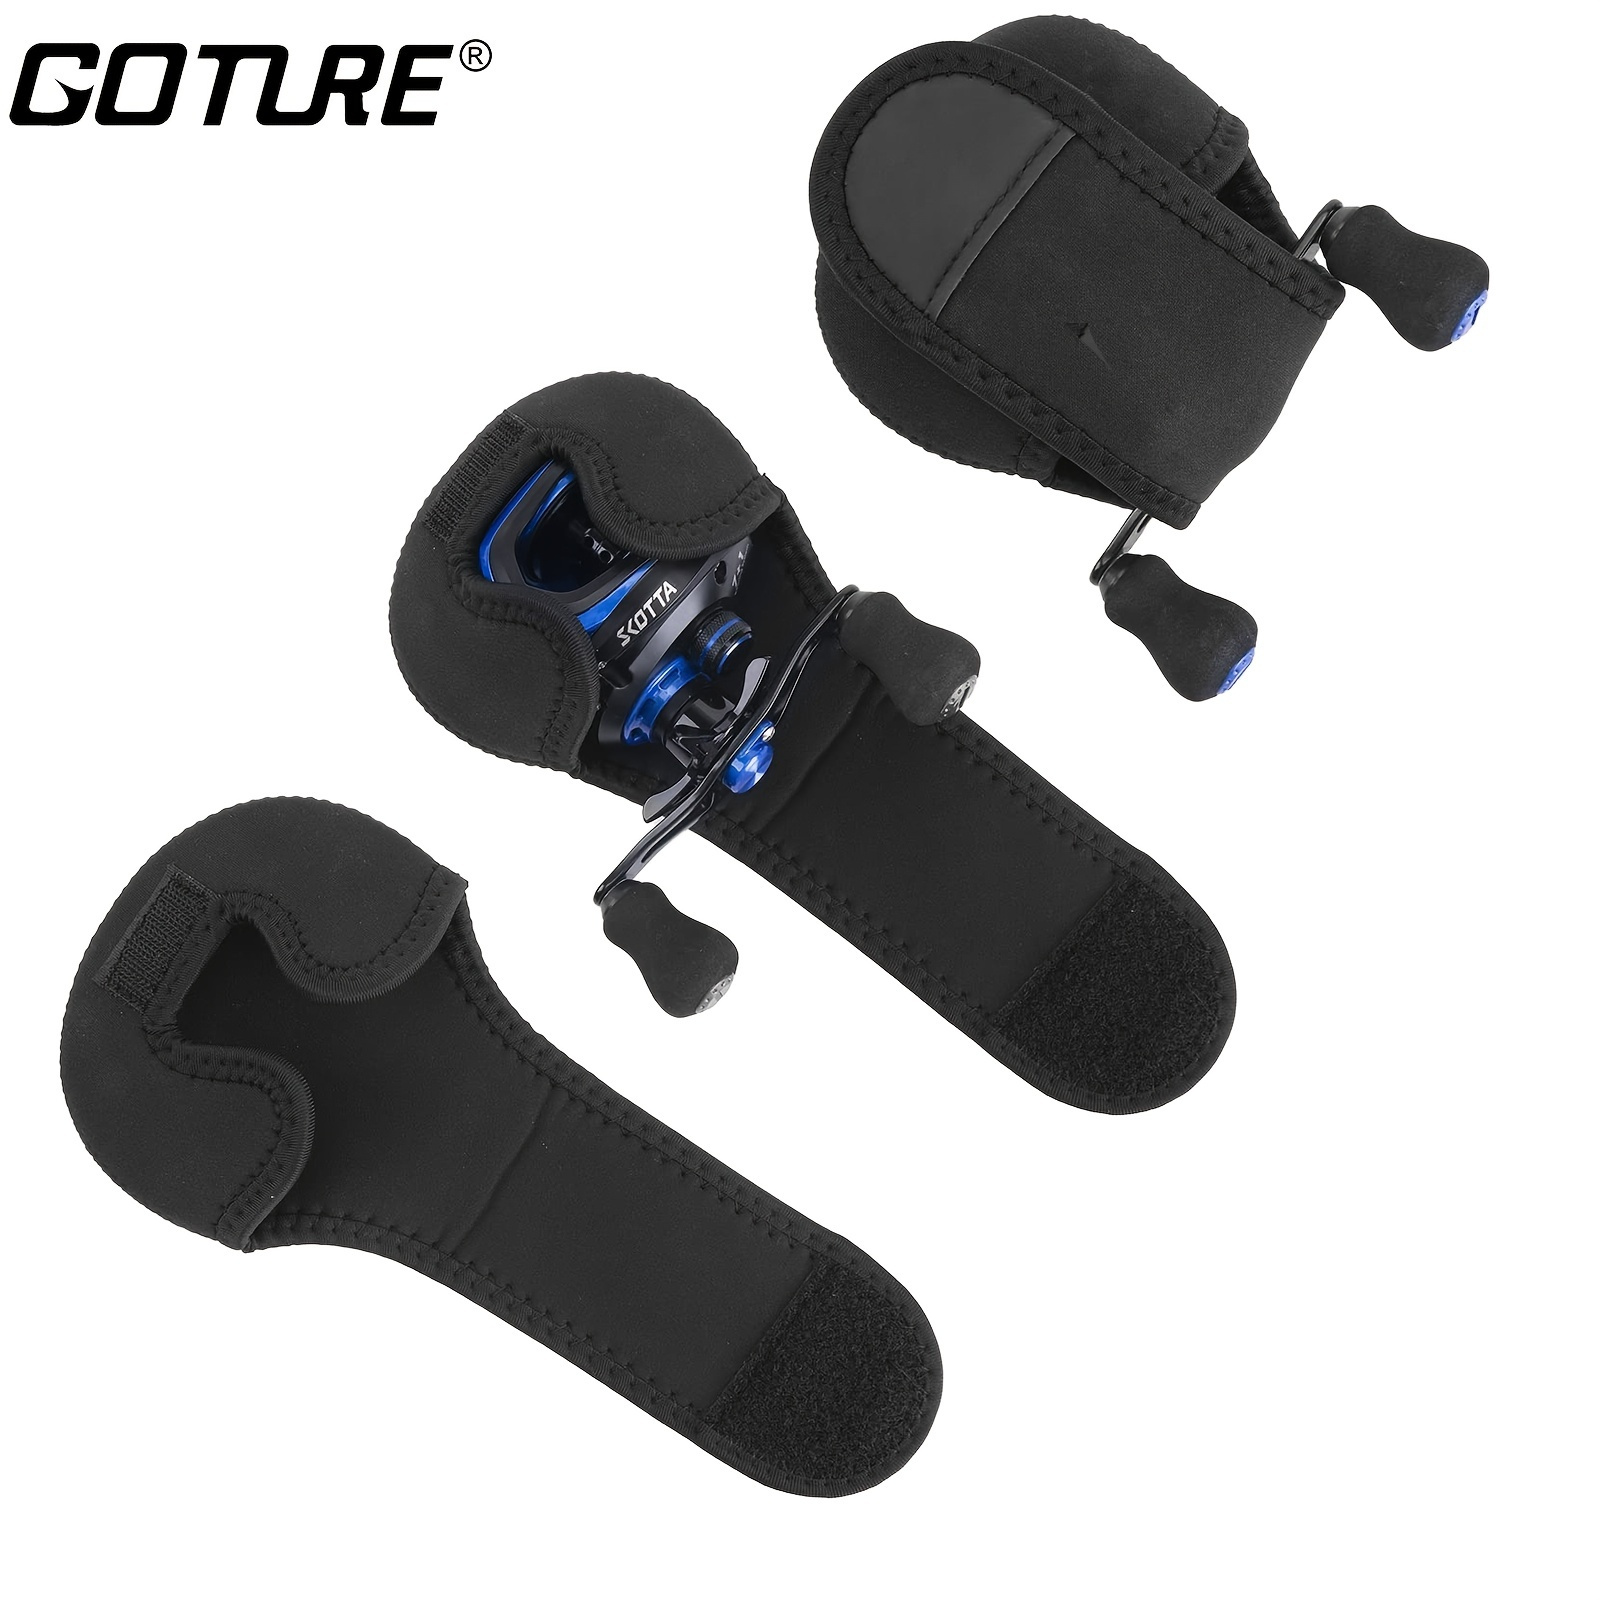 

Keep Your Fishing Reel Protected With The Goture Portable Baitcaster Cover Case!